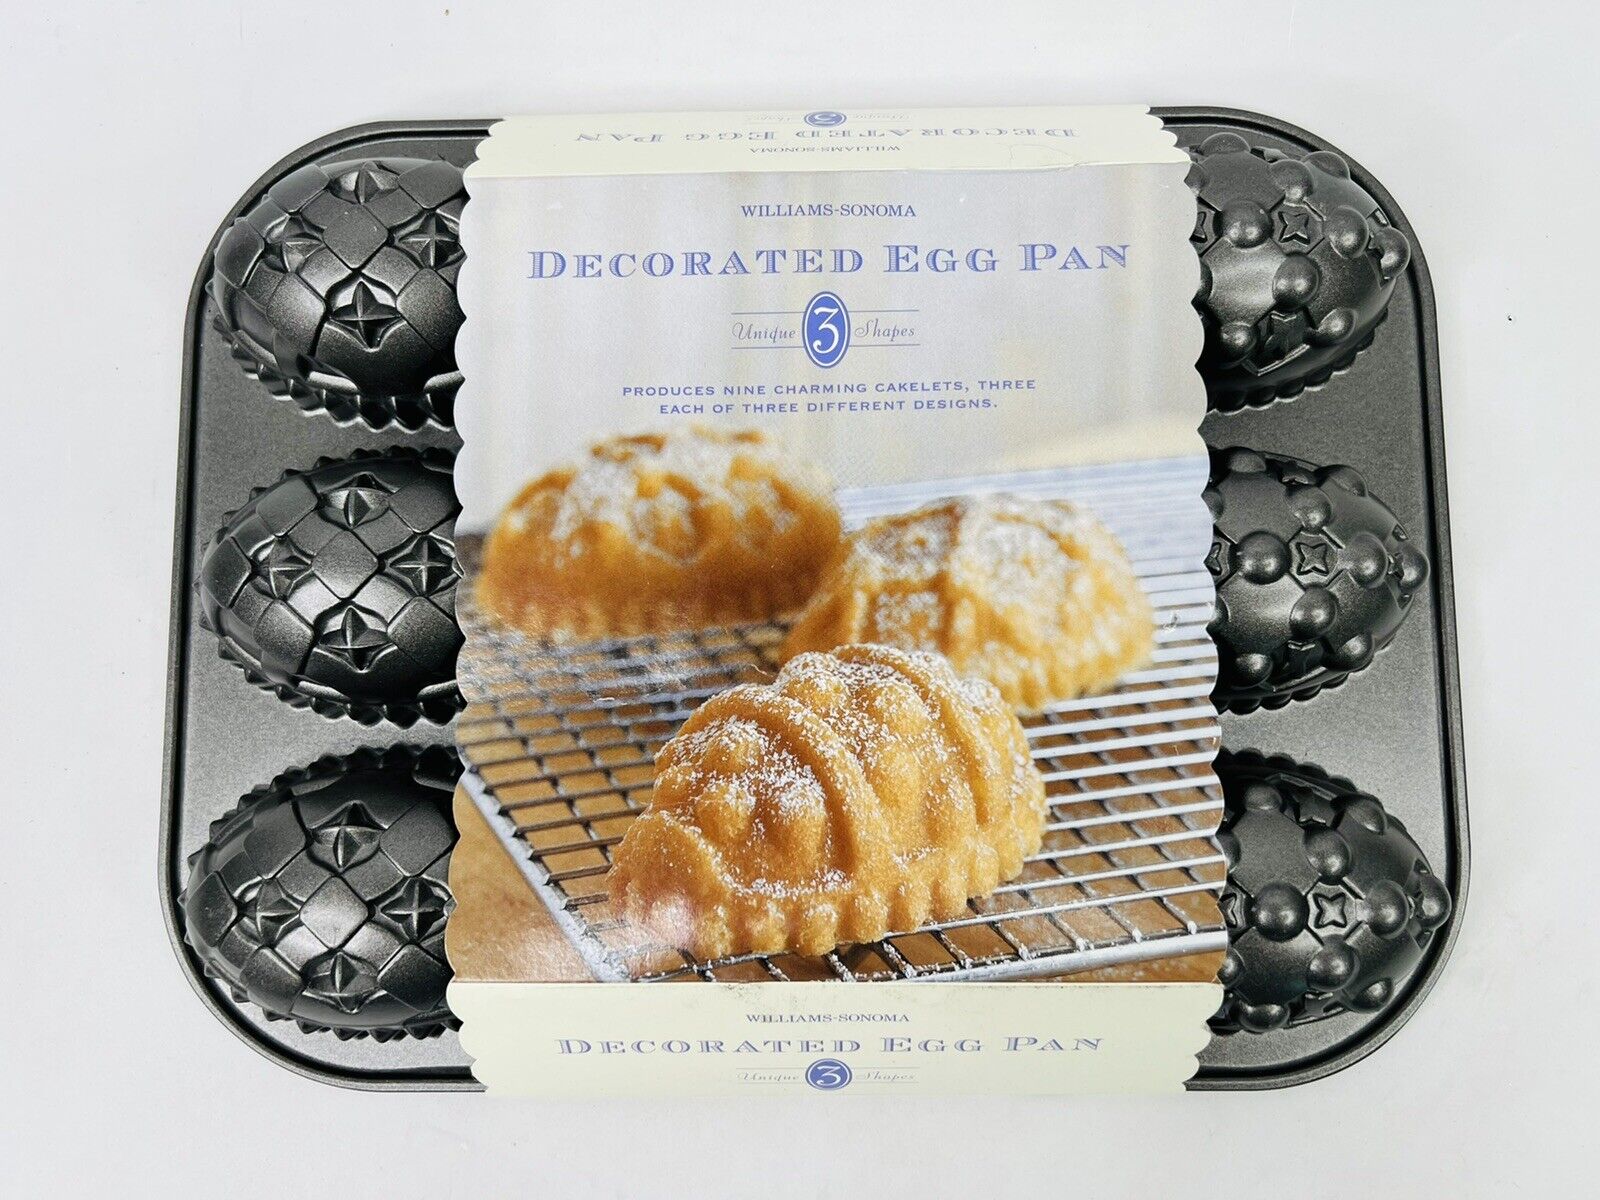 Williams Sonoma Nordic Ware Decorated Egg Baking Pan - New